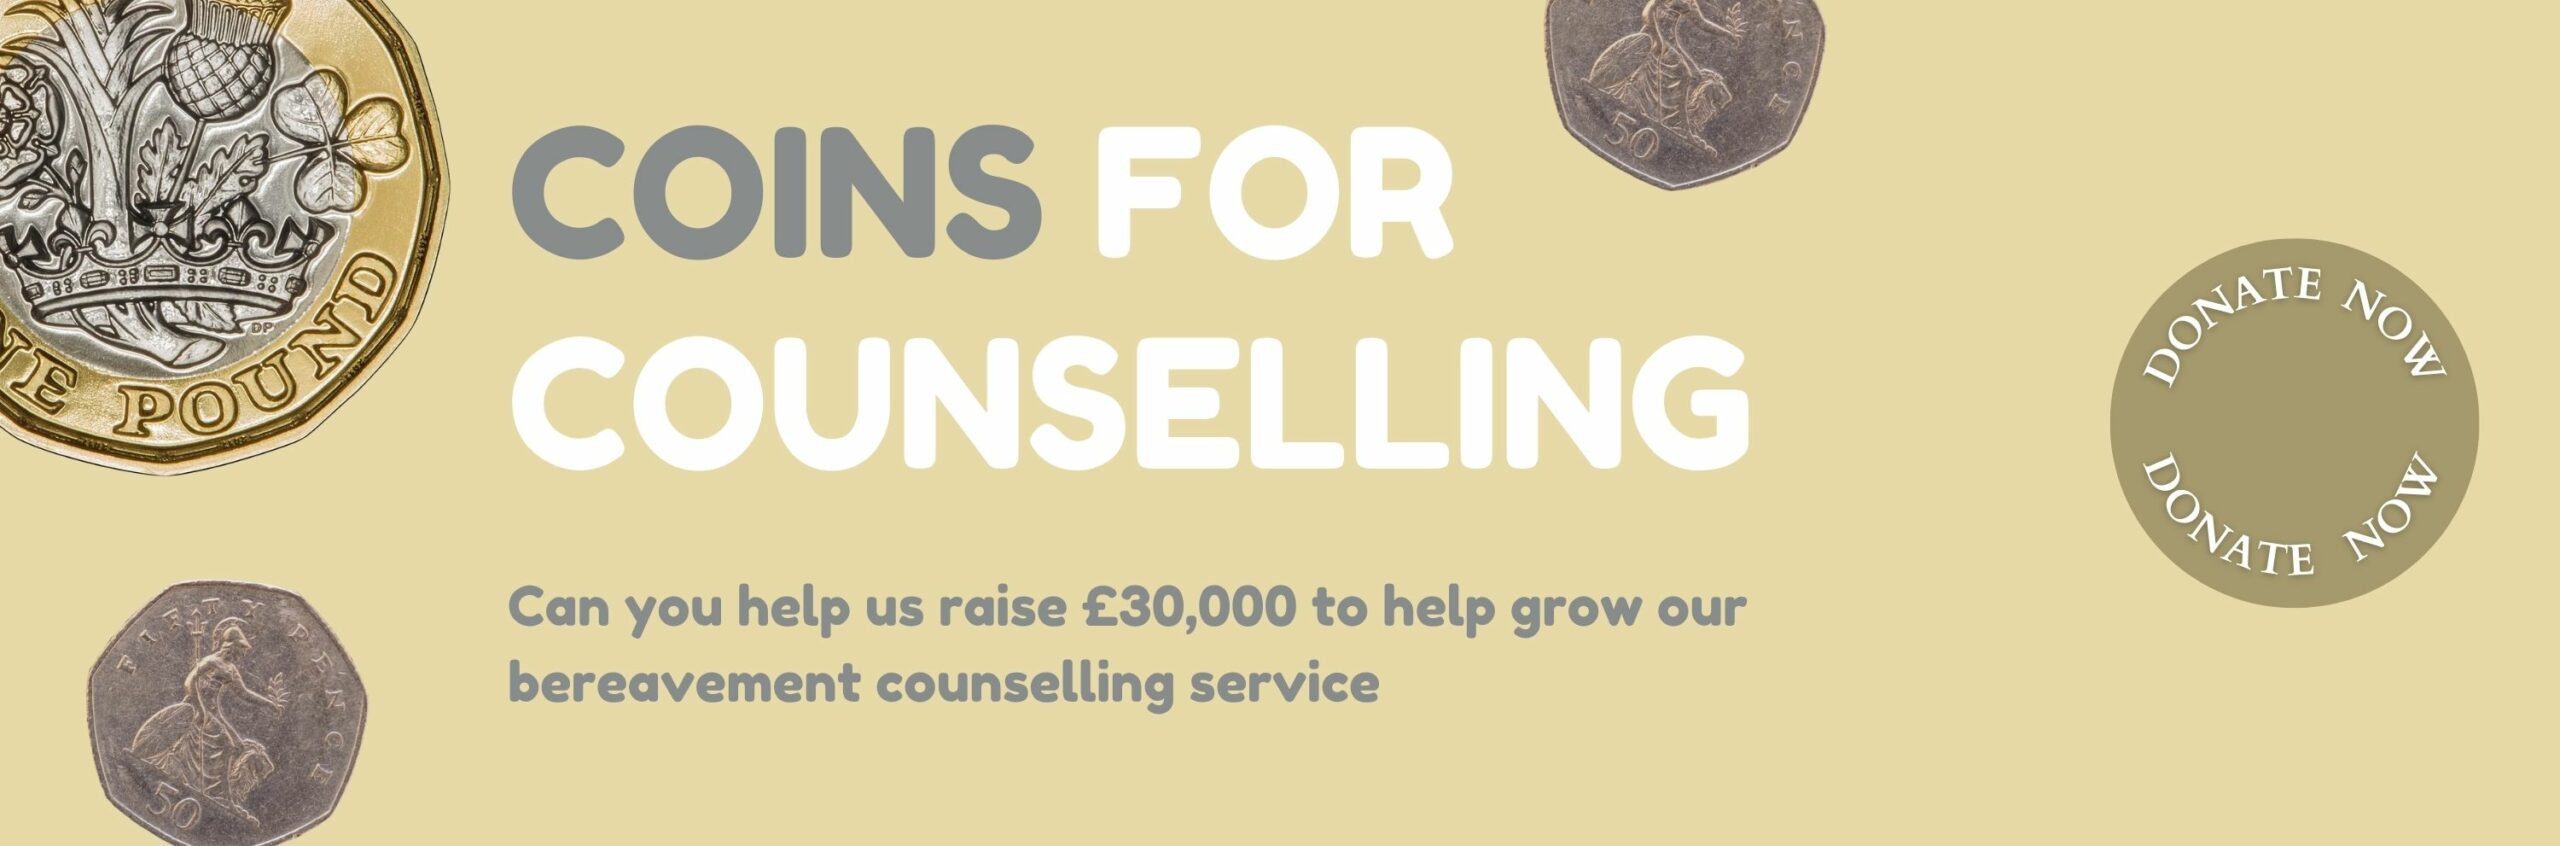 Coins for counselling web slider